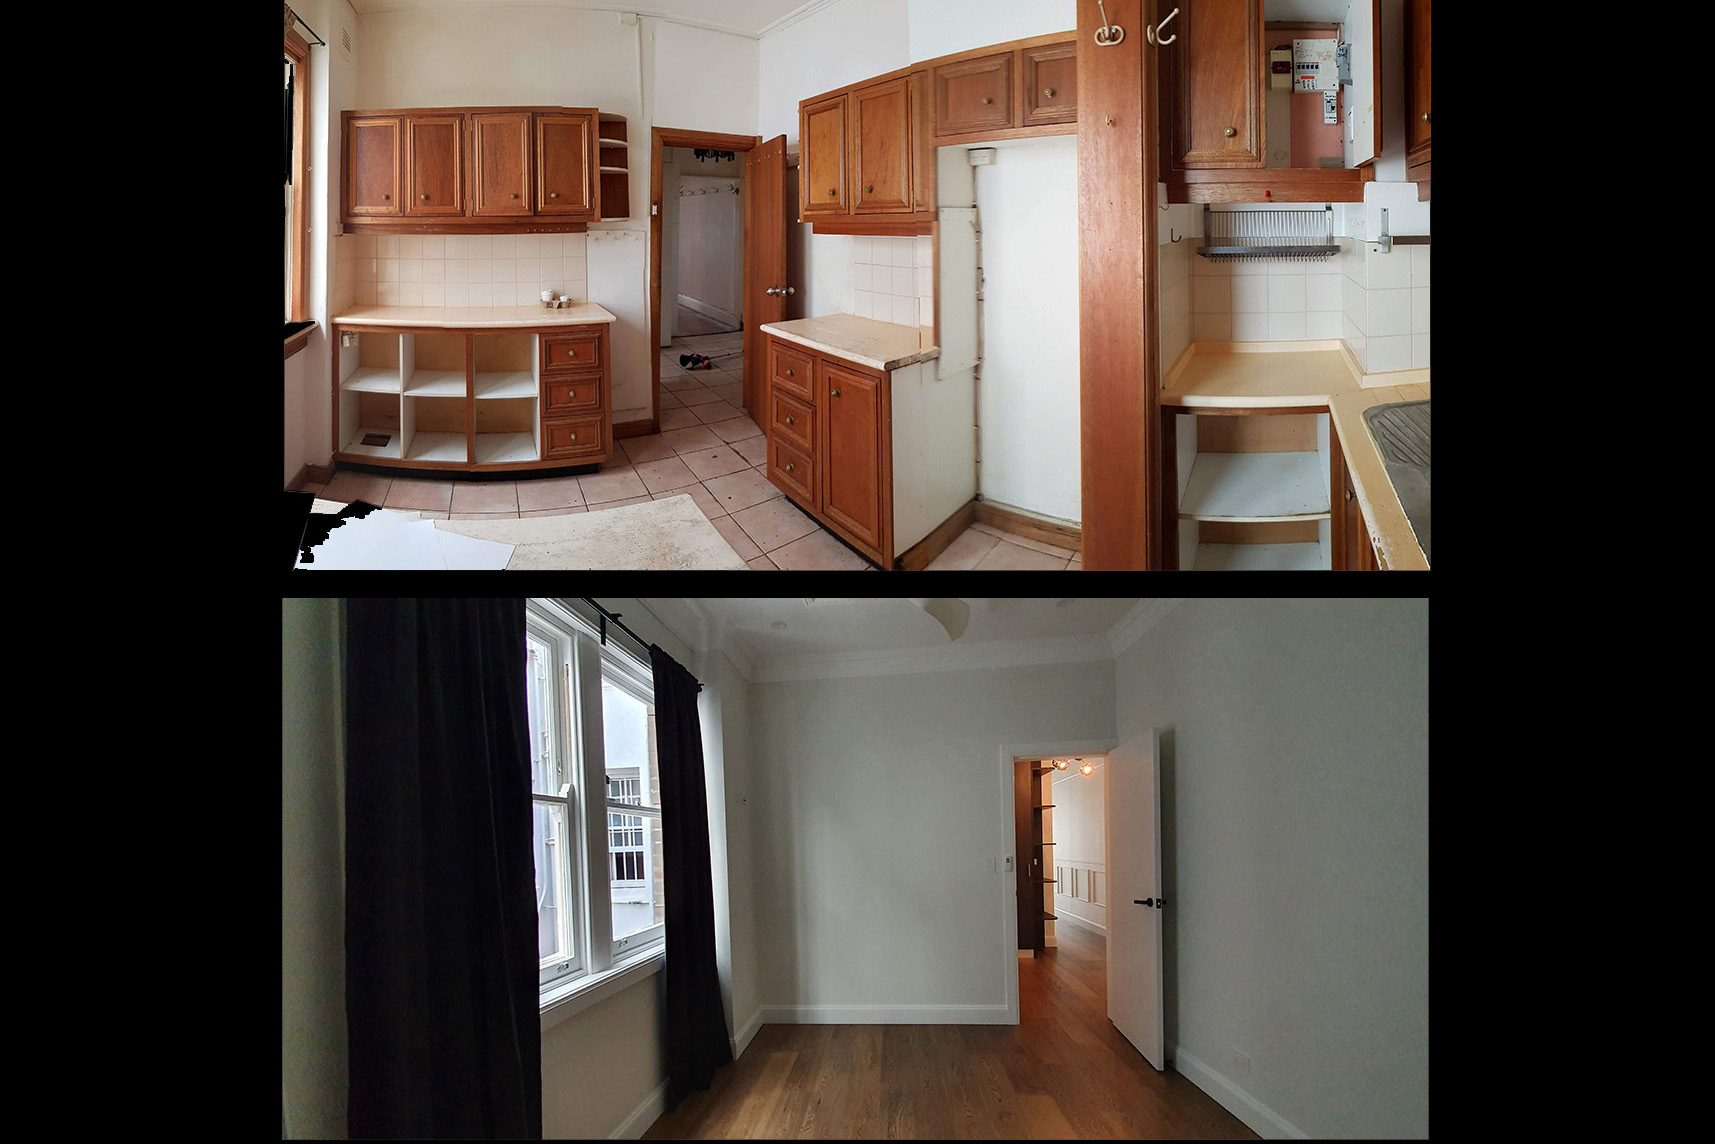 A kitchen and living room are shown in two different photos.